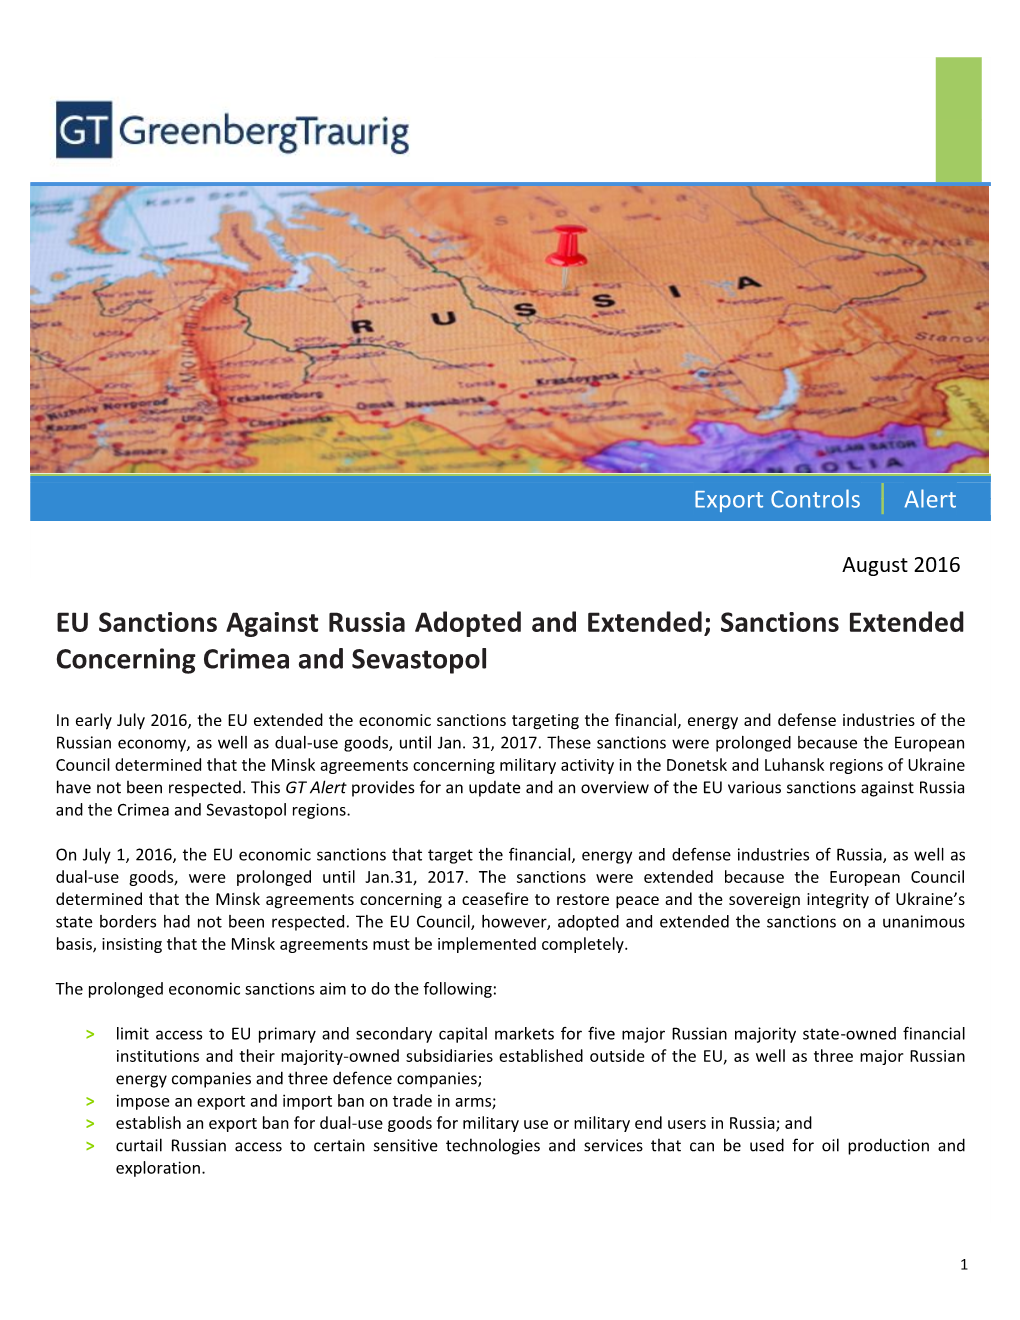 EU Sanctions Against Russia Adopted and Extended; Sanctions Extended Concerning Crimea and Sevastopol